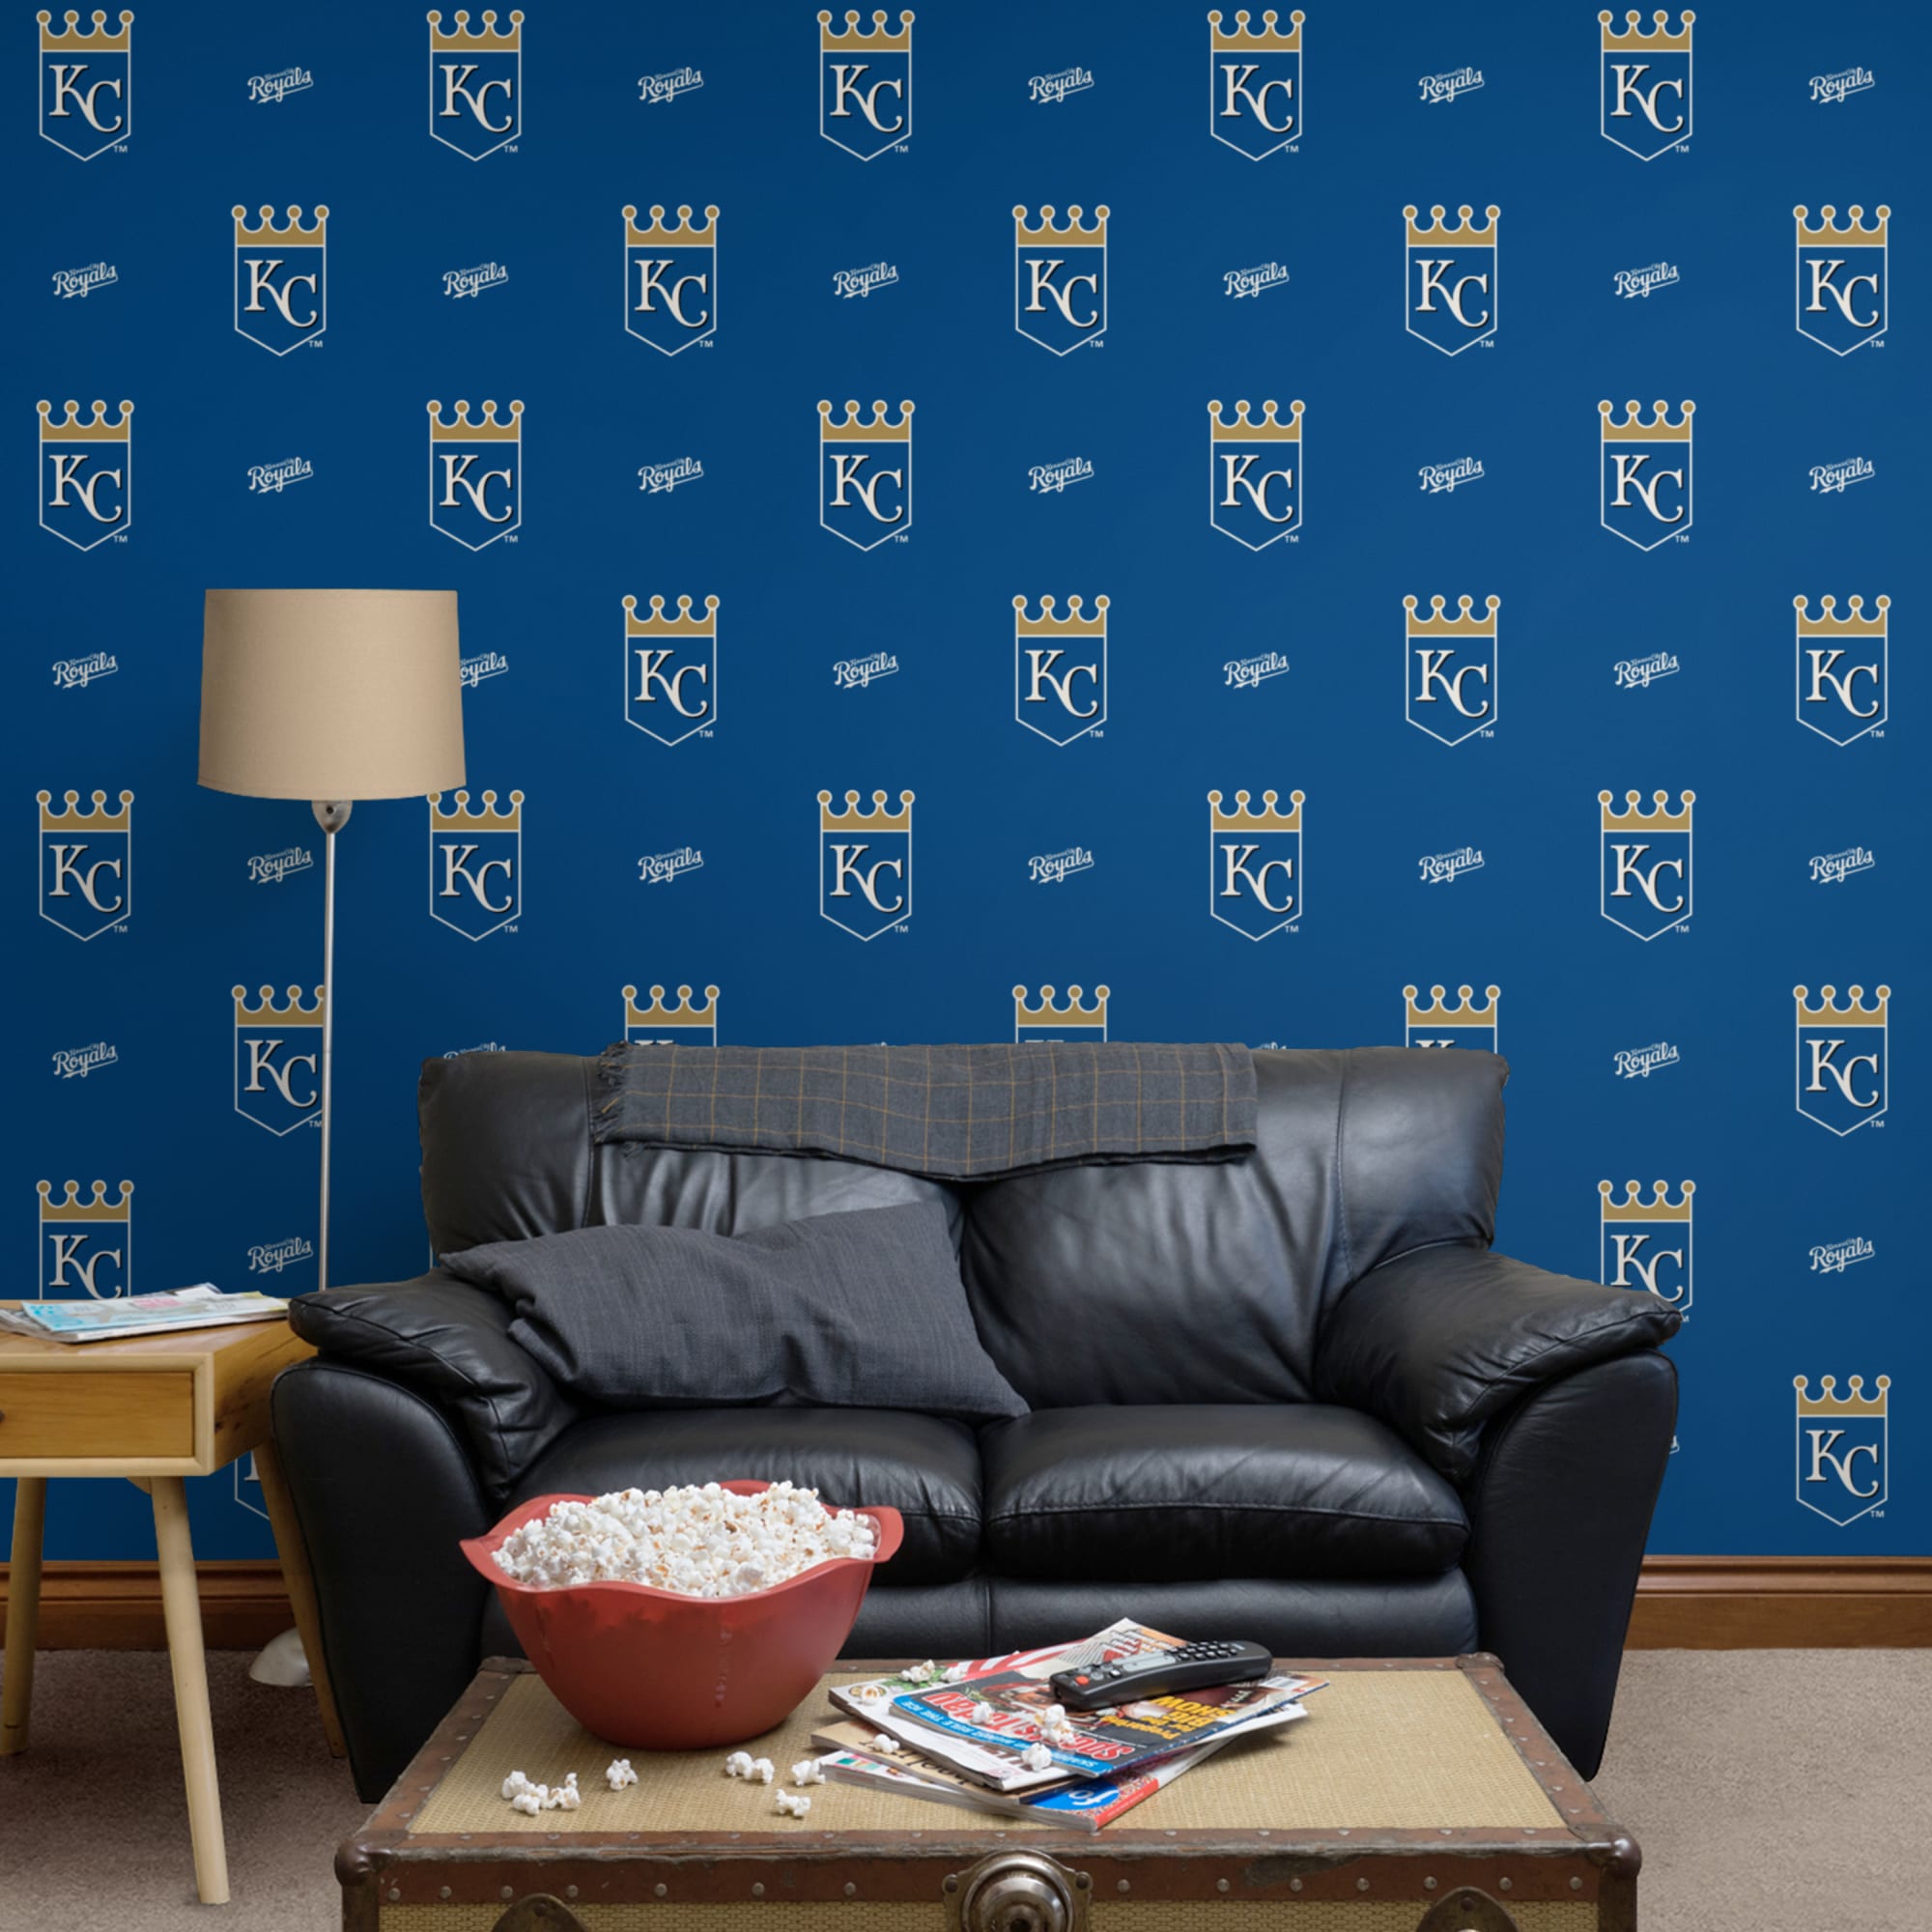 Kansas City Royals: Logo Pattern - Officially Licensed Removable Wallpaper 12" x 12" Sample by Fathead